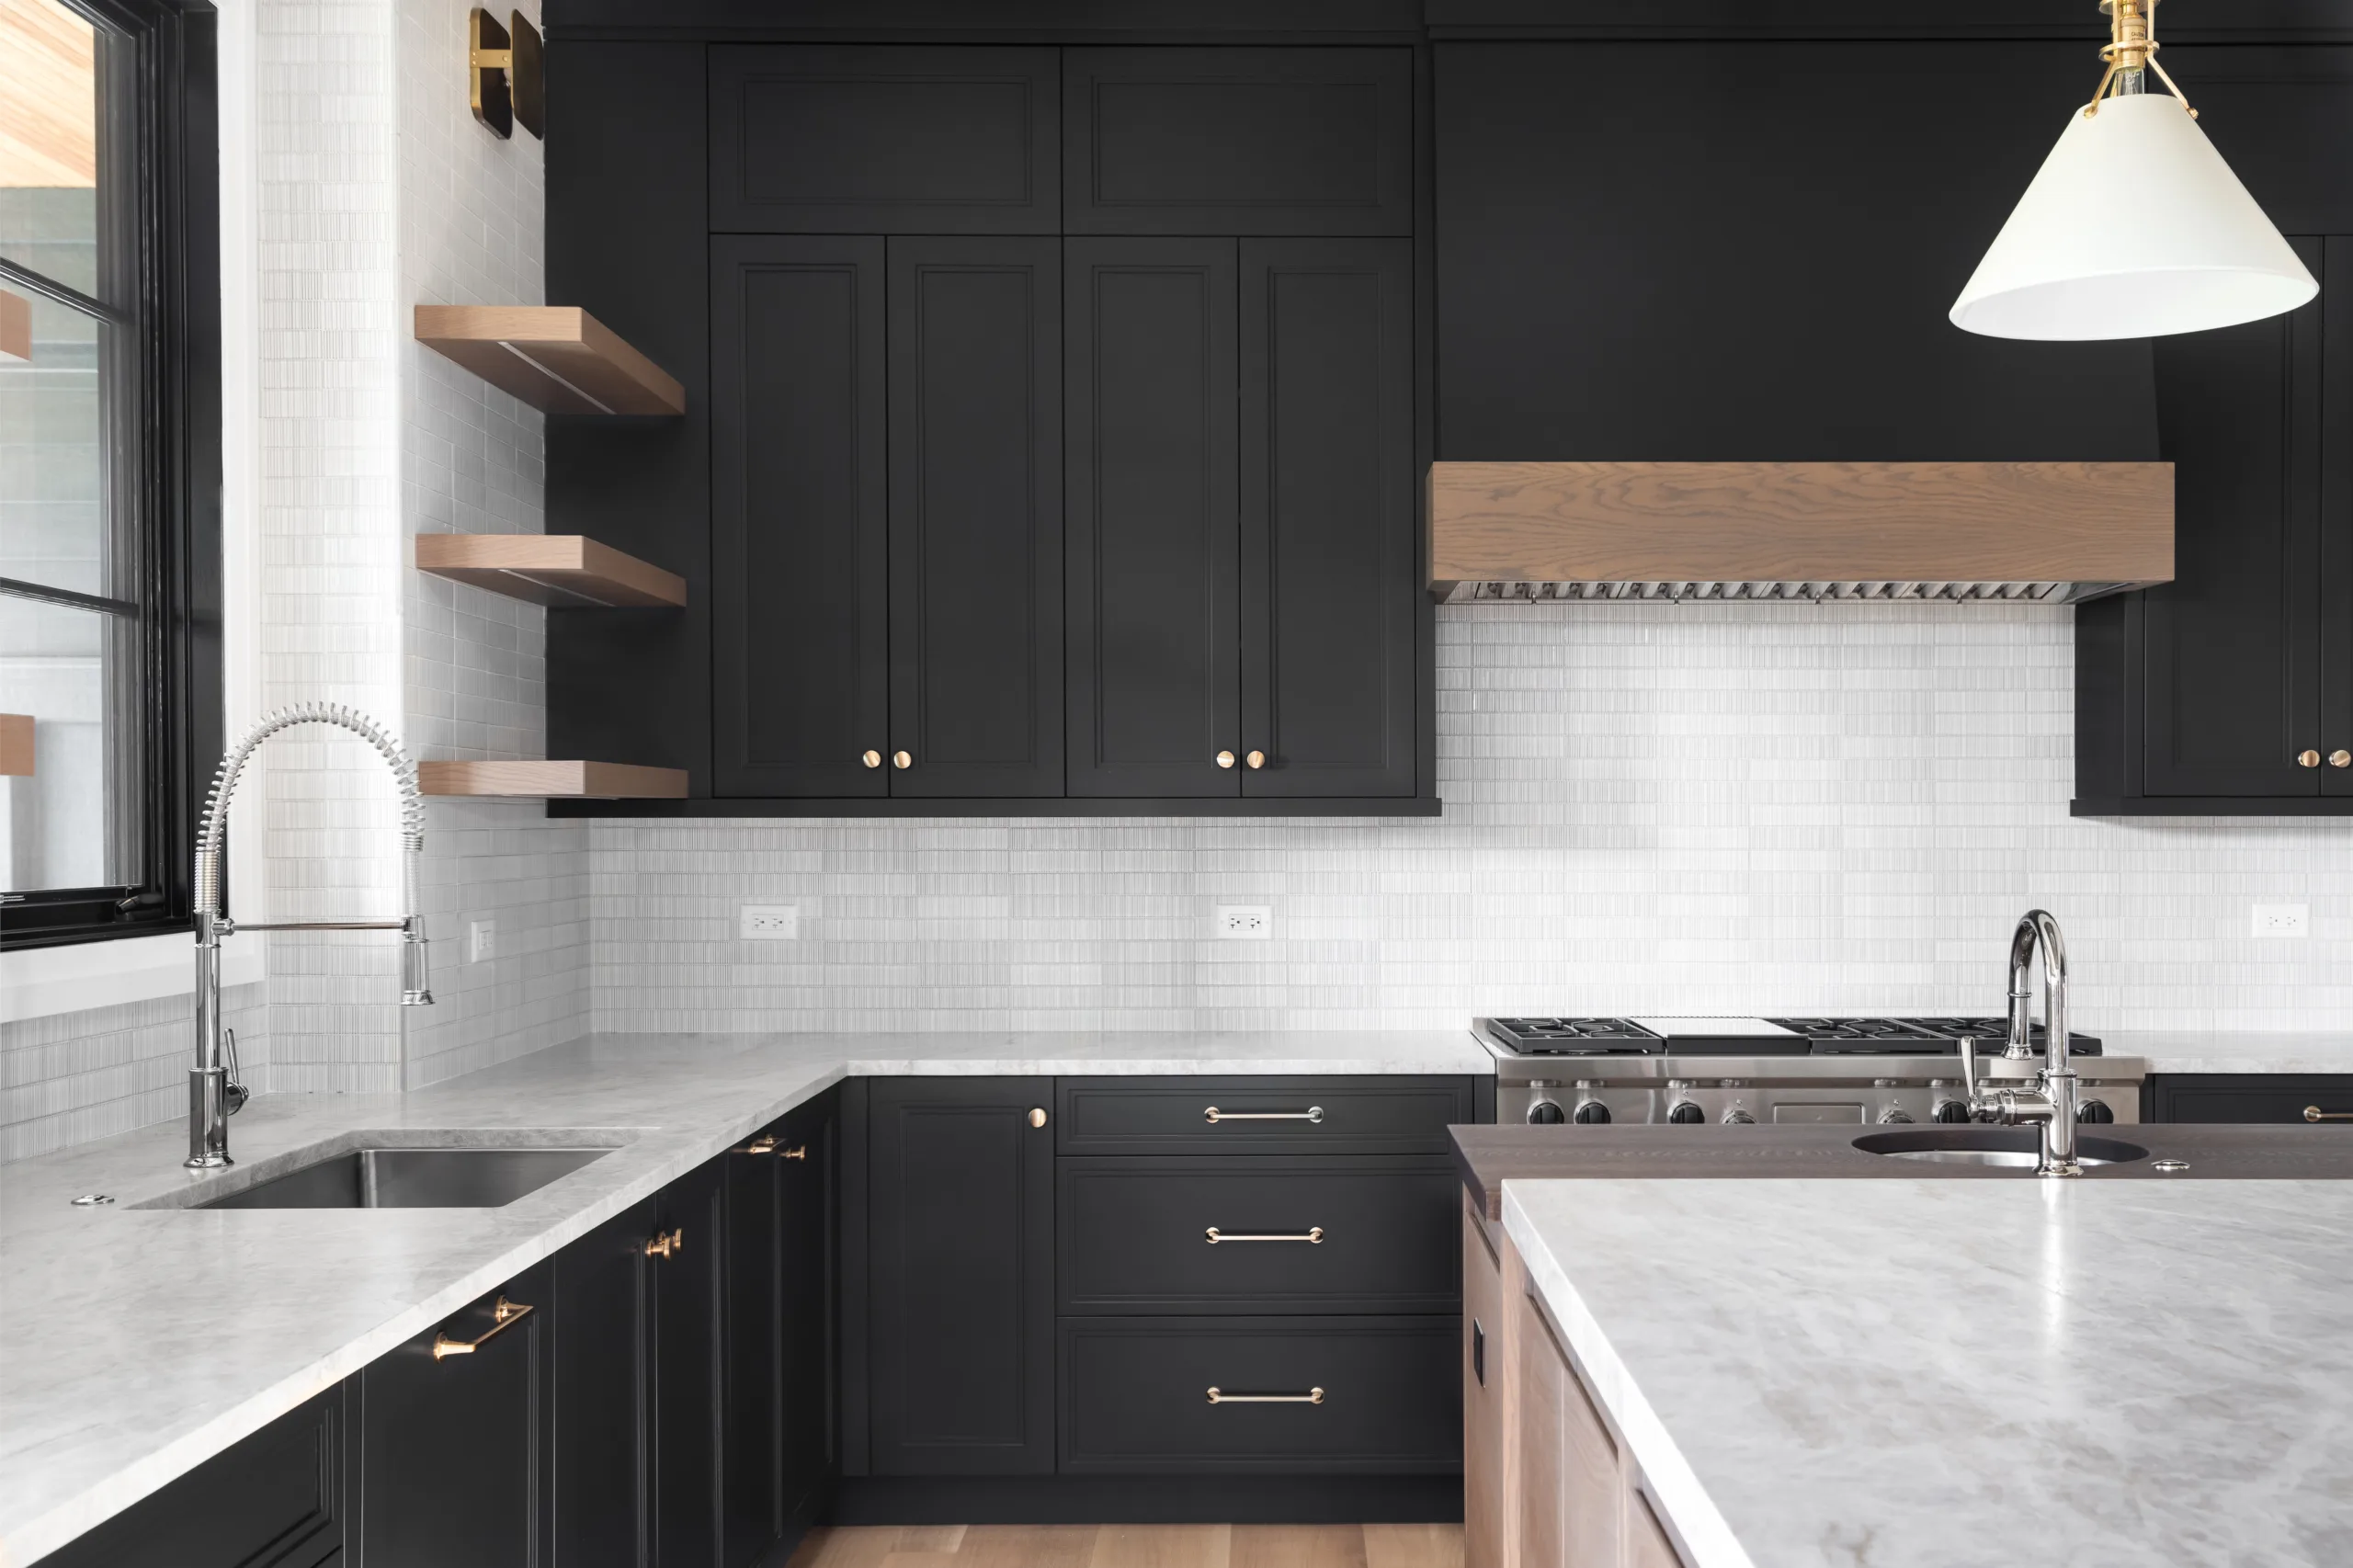 https://ootwc.com/wp-content/uploads/2023/01/Black-Kitchen-Cabinets-3-scaled.webp